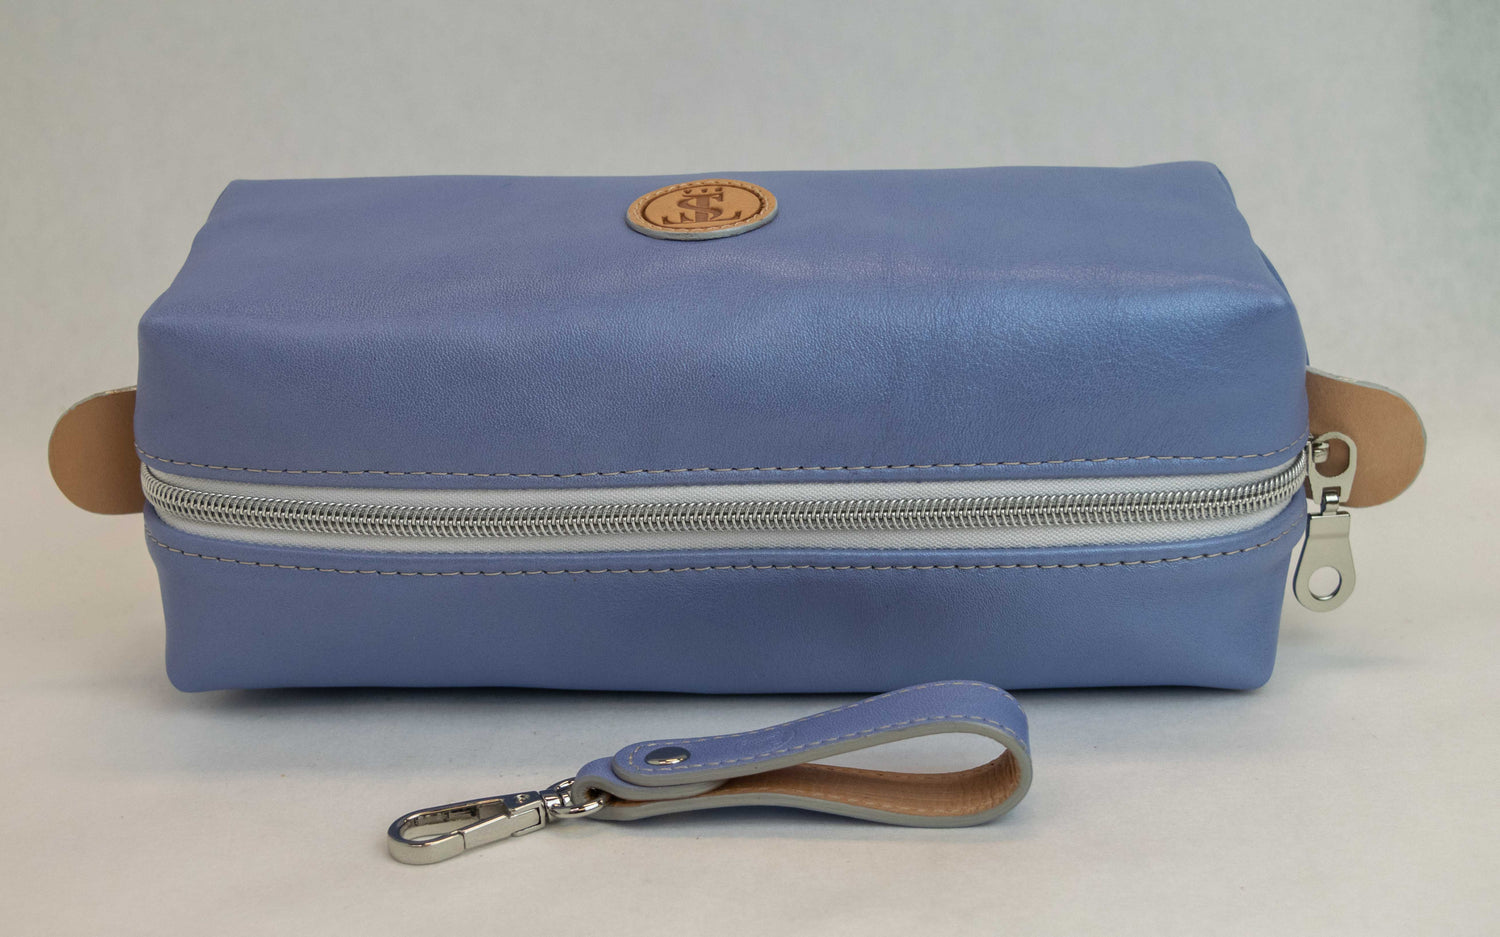 Top view of T5 bath dopp kit toiletry wash bag designer handcrafted of smooth calf leather in light Periwinkle blue.